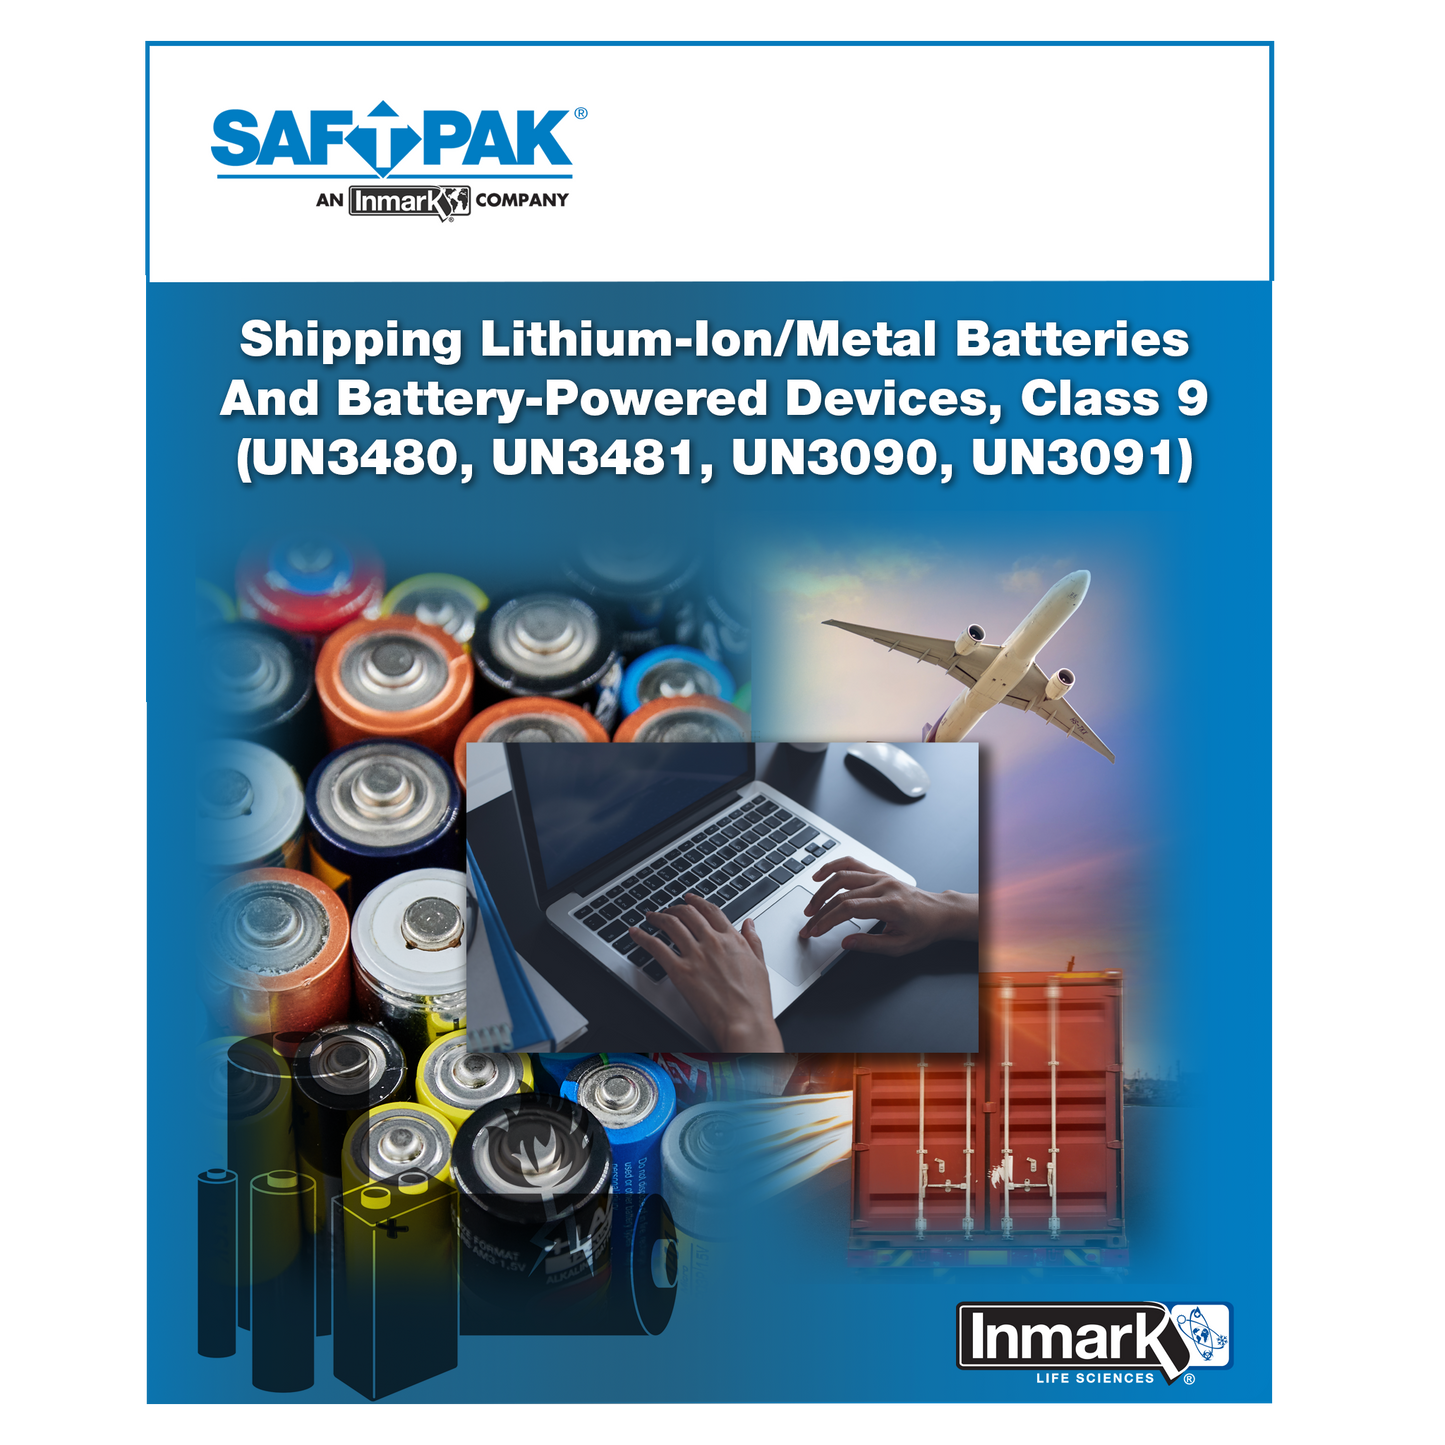 Shipping Lithium-Ion / Metal Batteries Training Course